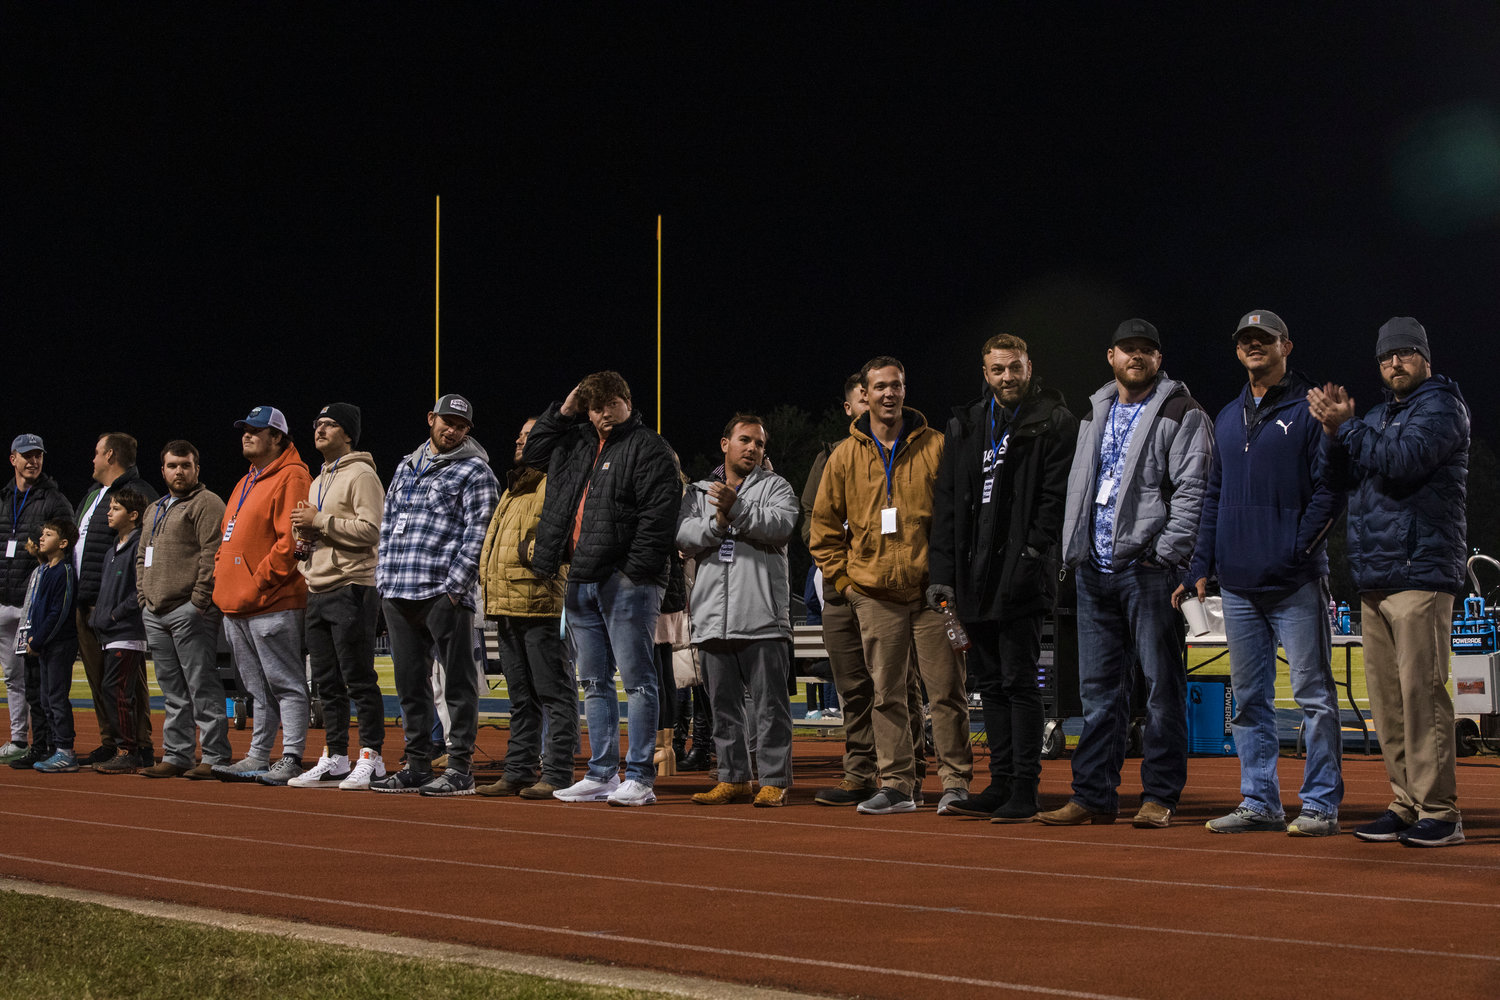 Gulf Shores football alumni were honored on the track of Mickey Miller Blackwell Stadium at the Sportsplex before the Dolphins’ state quarterfinal contest against the Faith Academy Rams Friday, Nov. 18. Many of the former players helped laid the foundation toward Gulf Shores’ historic season in 2022.